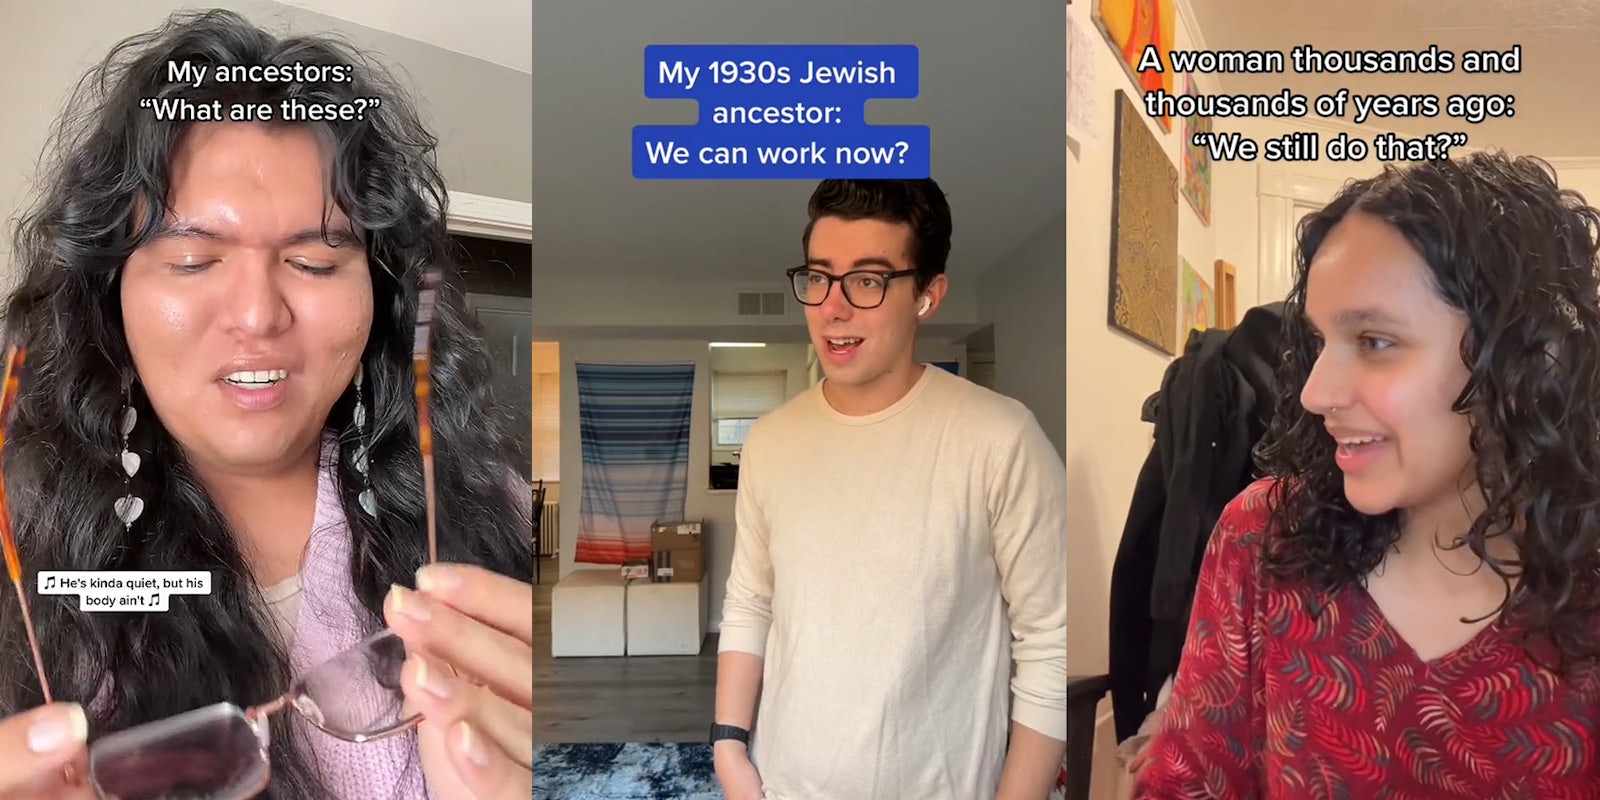 person holding glasses with caption 'My ancestors: 'What are these?' (l) person standing speaking with caption 'My 1930 Jewish ancestor: We can work now?' (c) person looking left speaking with caption 'A woman thousands of years ago: 'We still do that?' (r)